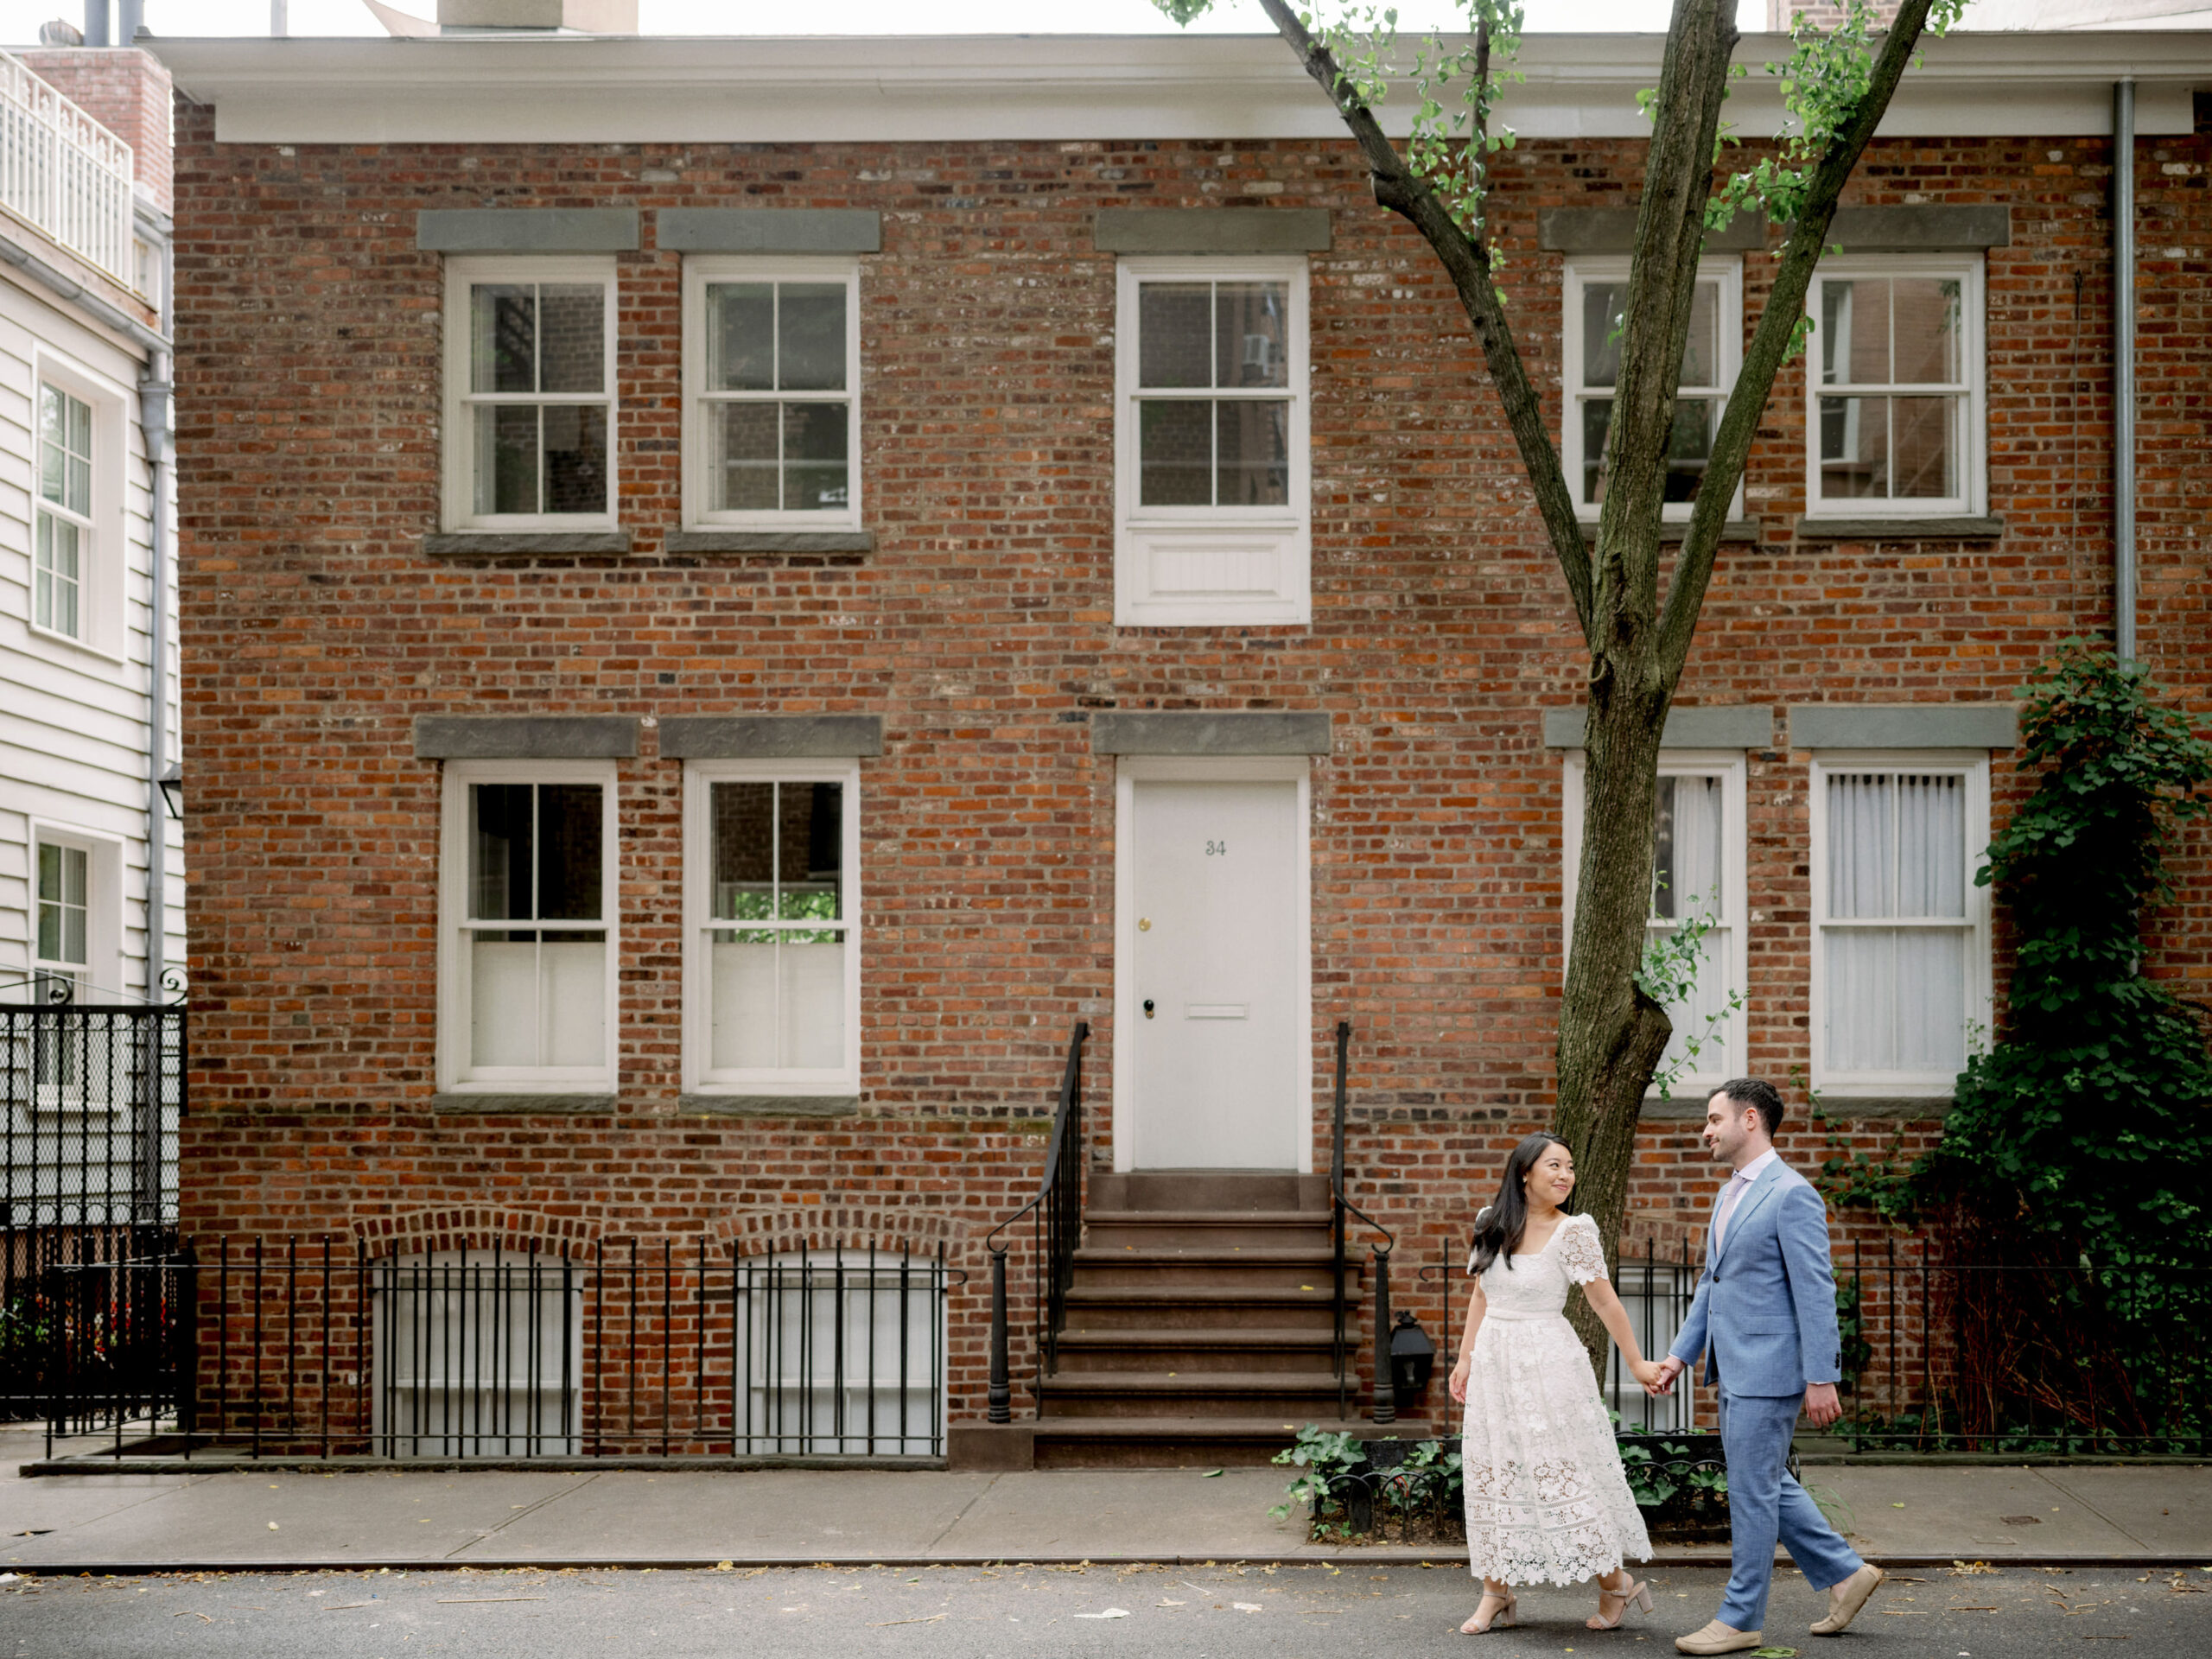 The engaged couple are walking the streets of NY with a red brick house in the background. Image by Jenny Fu Studio